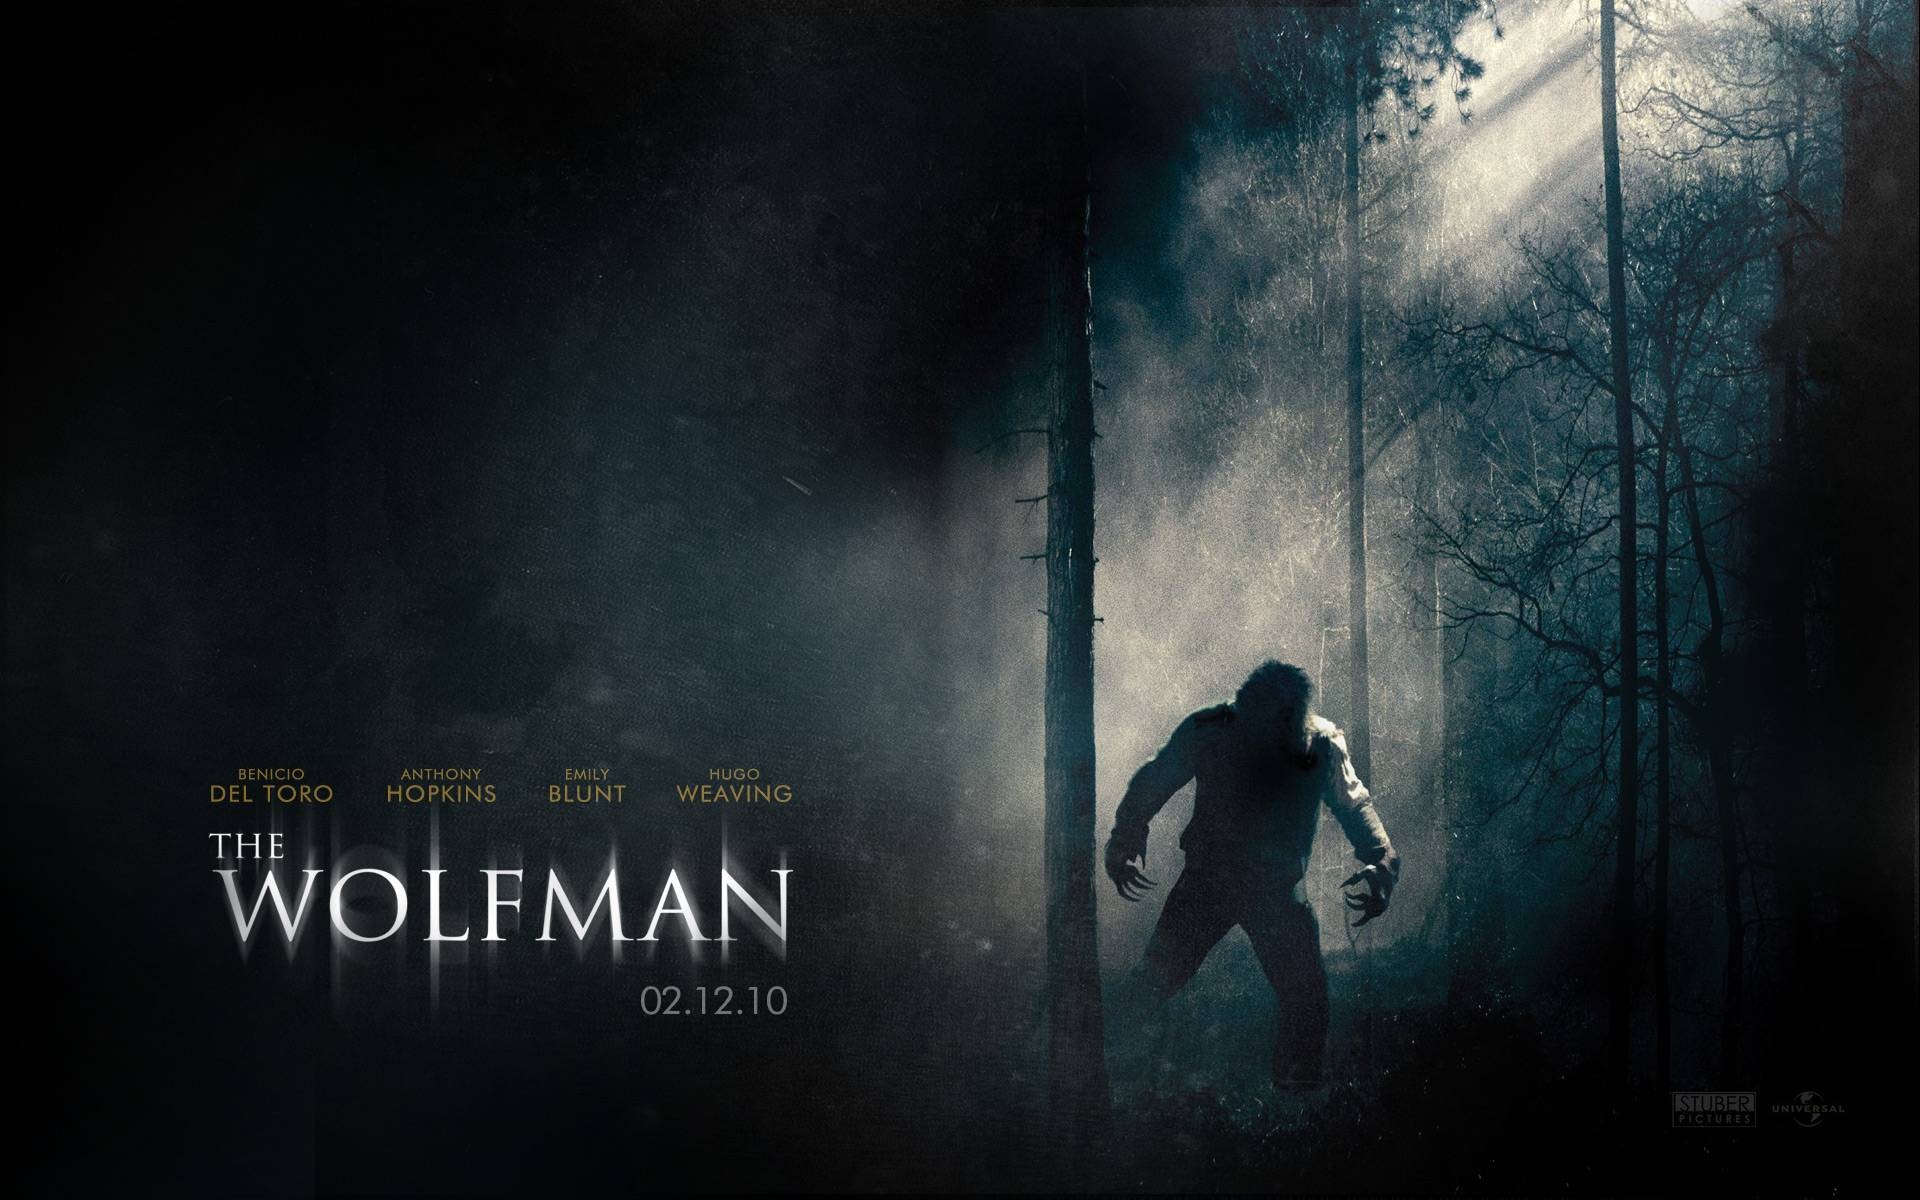 The Wolfman Movie Wallpapers #2 - 1920x1200